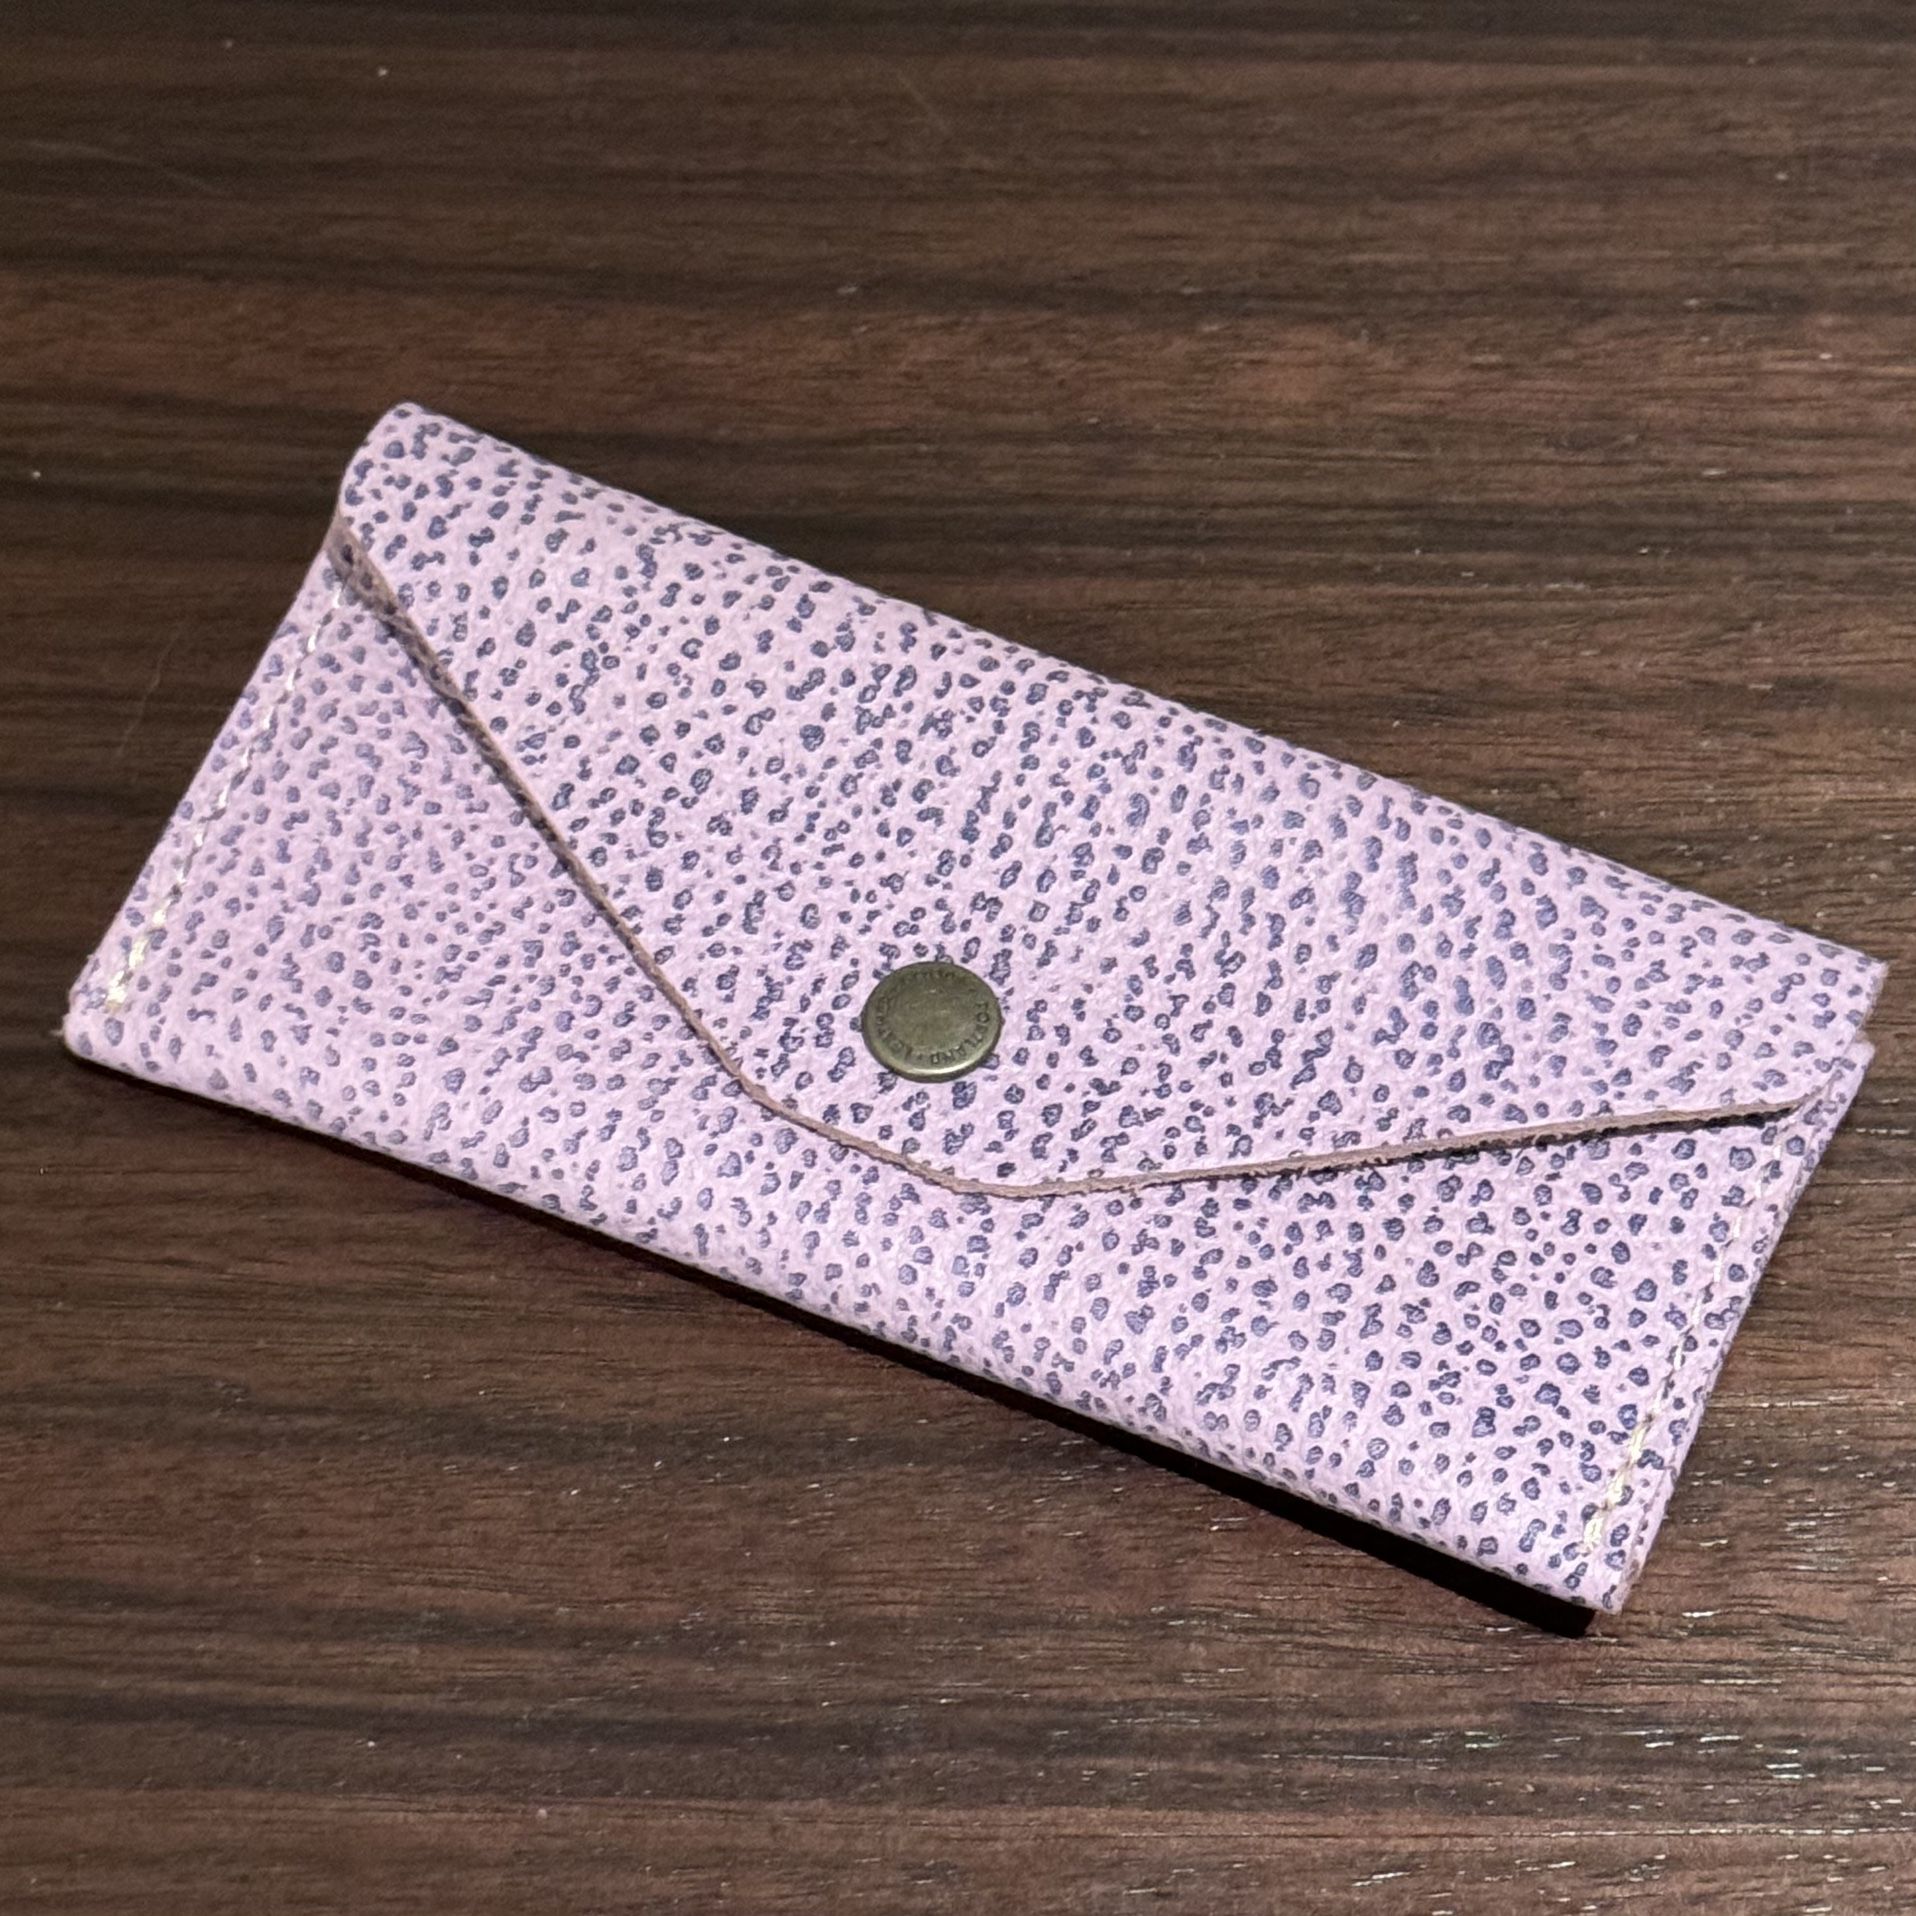 New, Rare Portland Leather Goods Small Envelope Wallet w/ Zipper in Pebbled Lilac